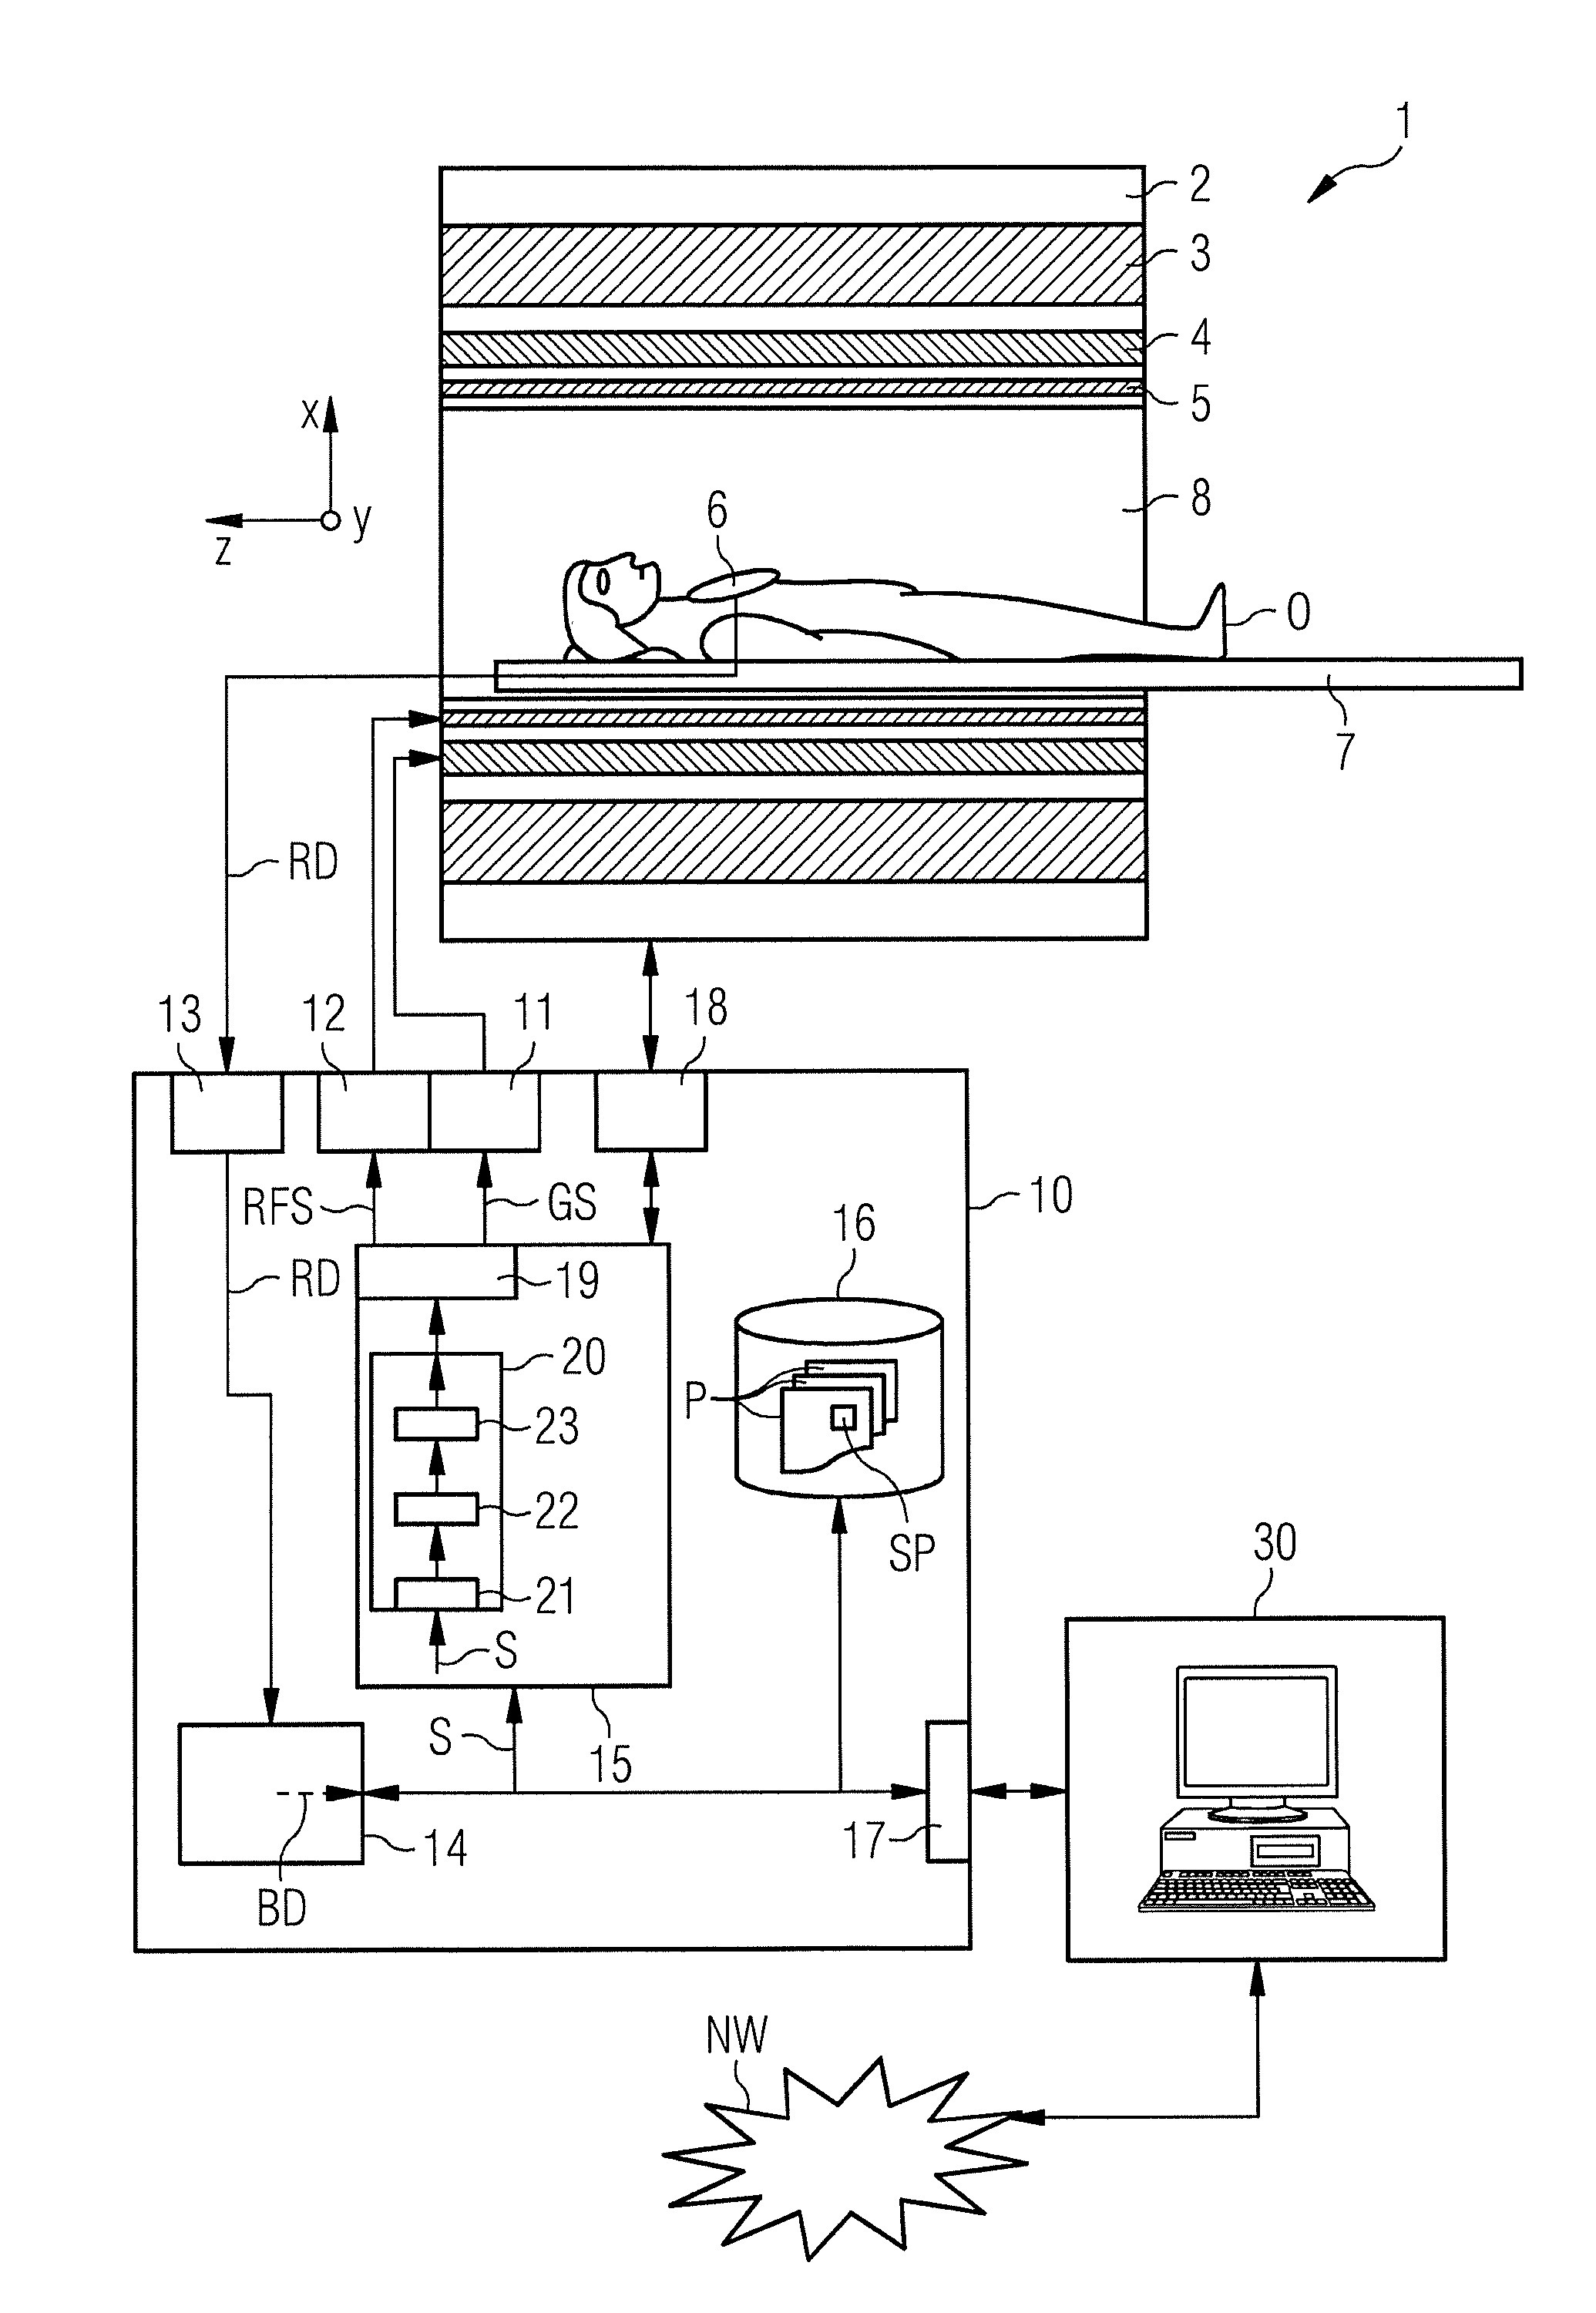 Optimization of a pulse sequence for a magnetic resonance system